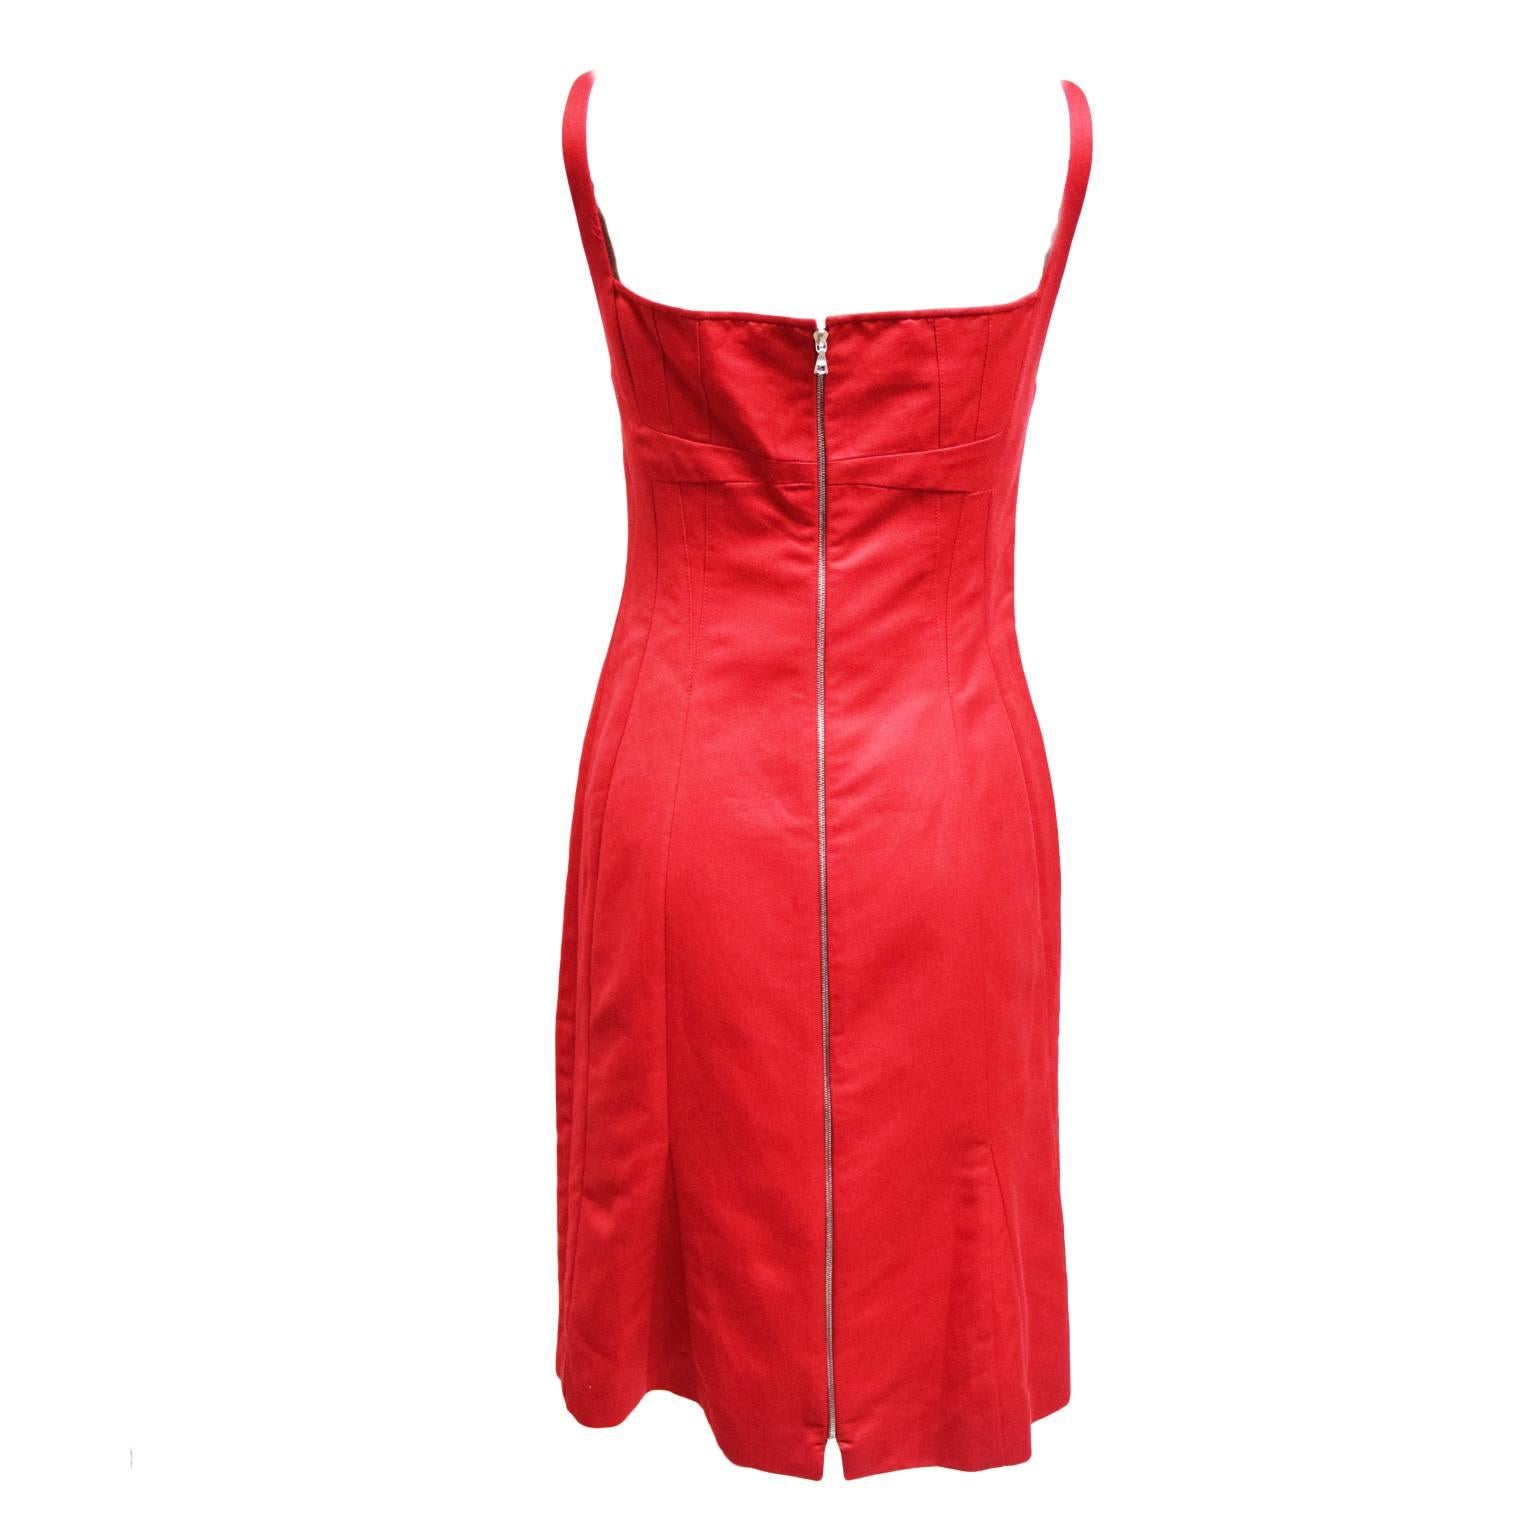 This beautiful, simplistic dress by Narciso Rodriguez is made of 100% red cotton. The silhouette is a sheath dress, and the back has a back slit. The Dress has a back zipped closure.  